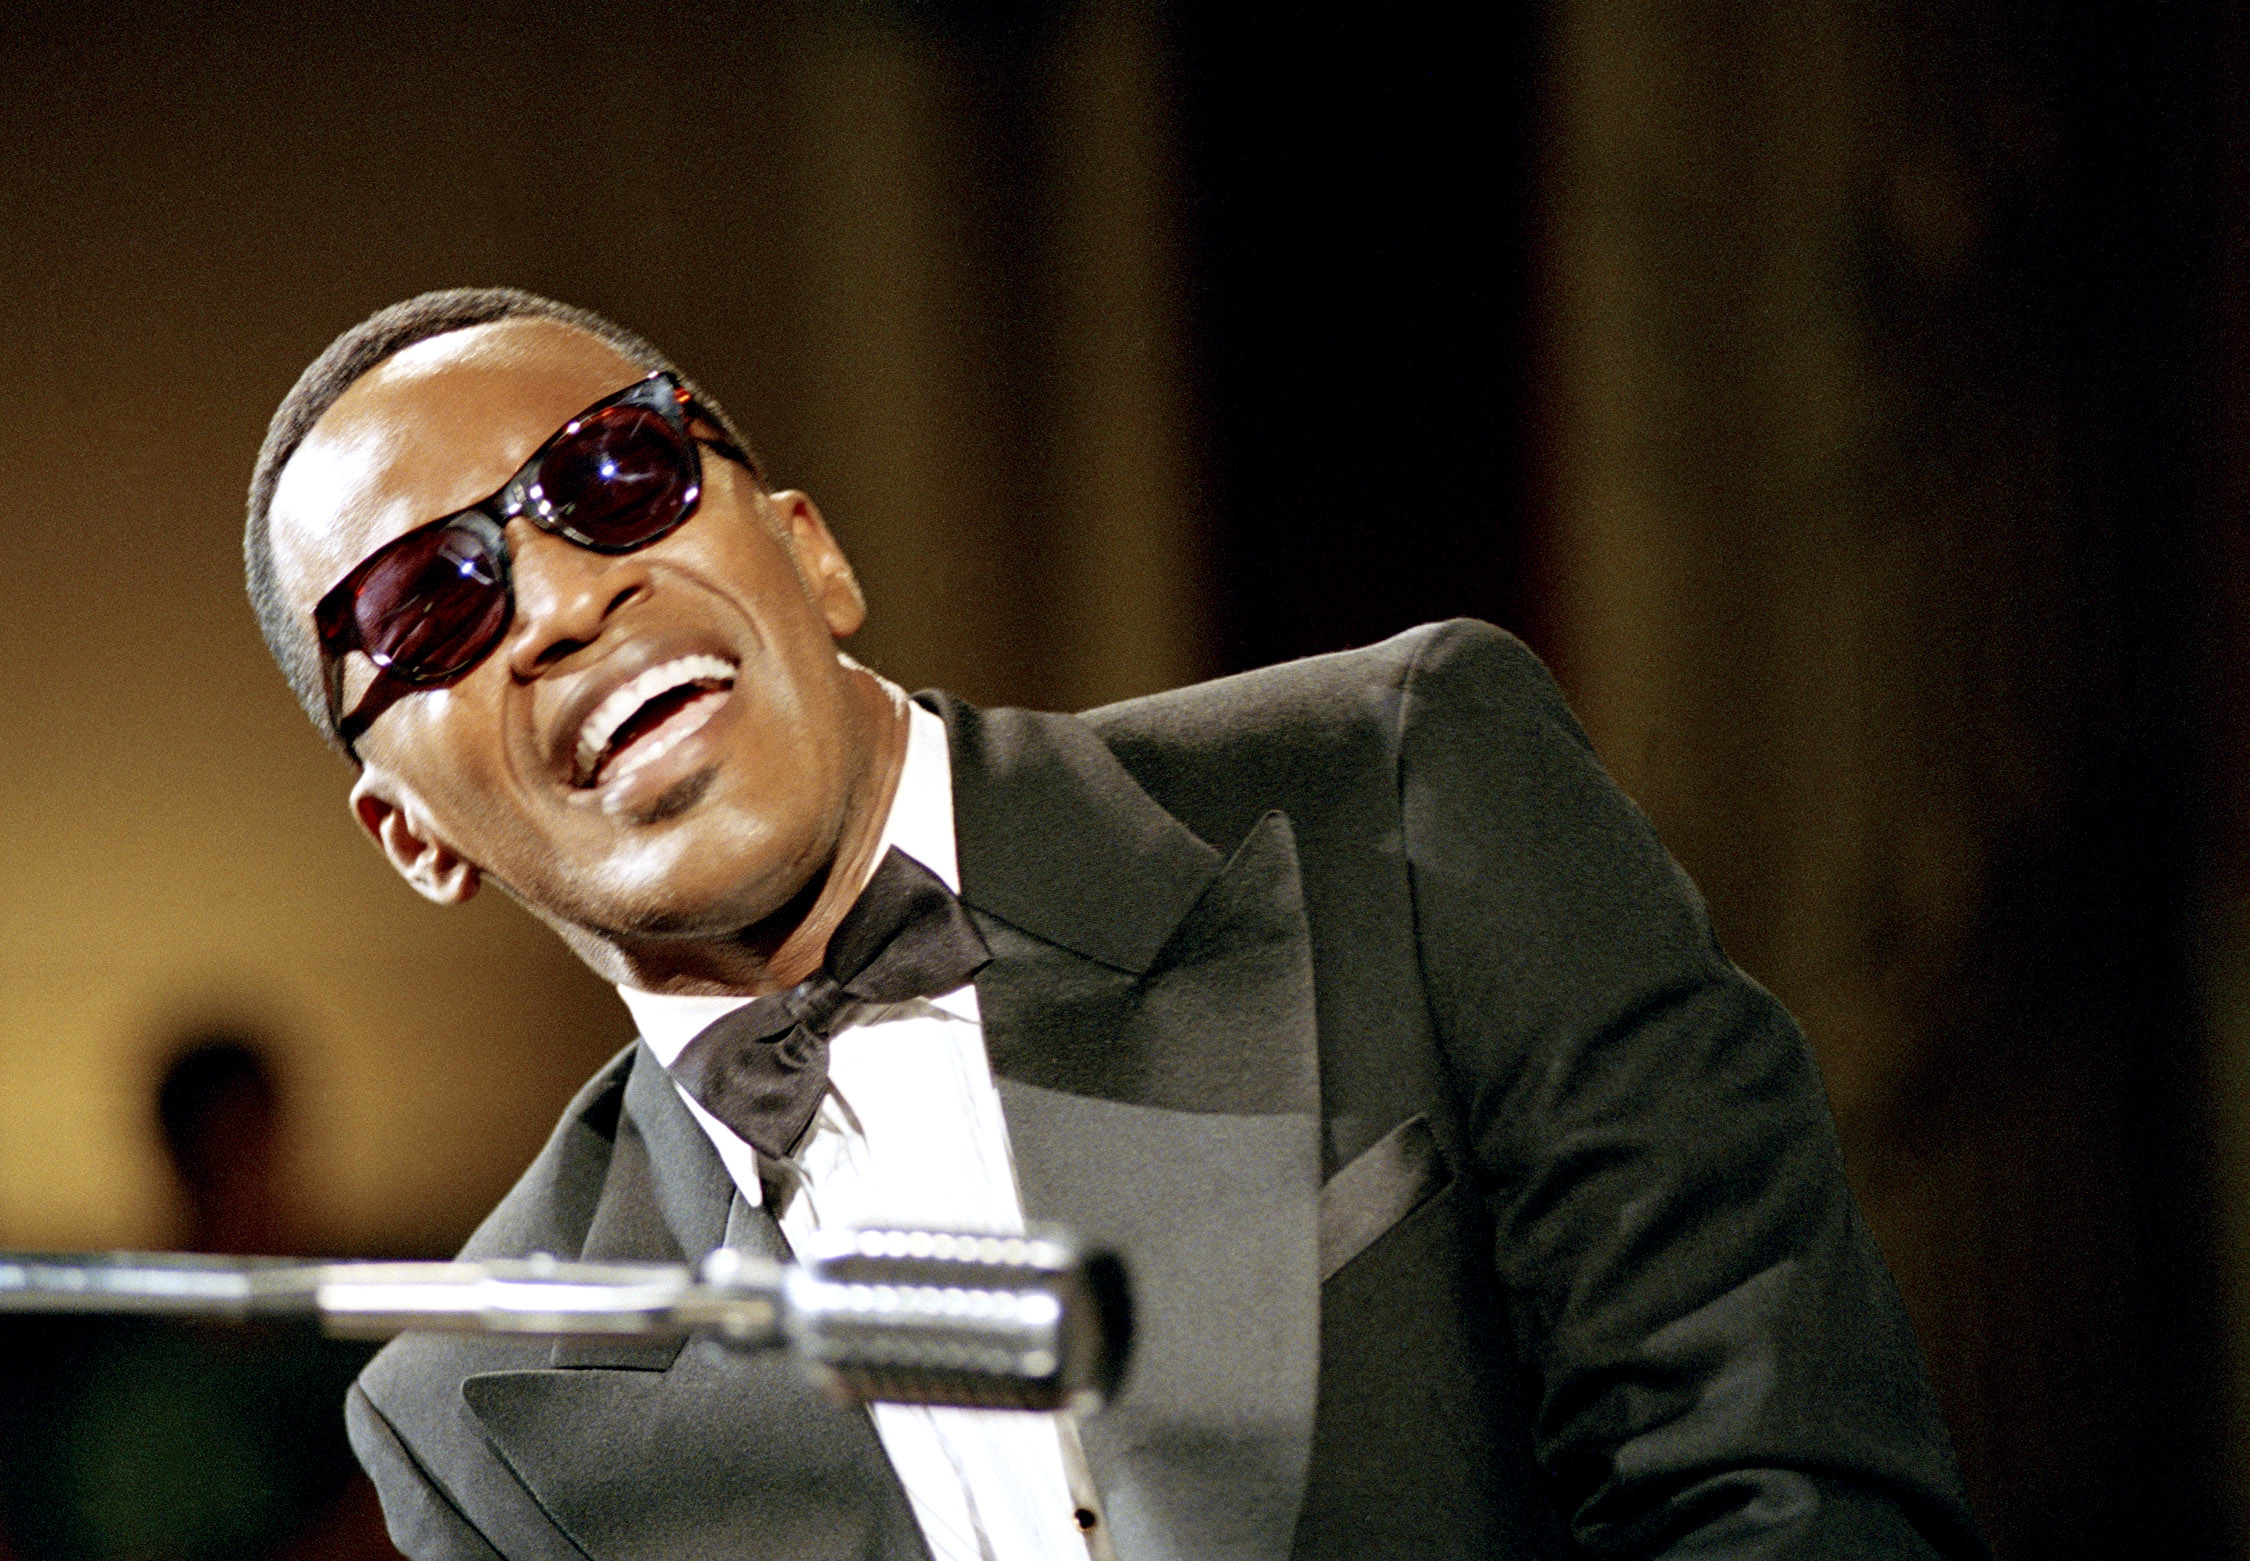 Jamie Foxx in a tuxedo playing the piano and singing